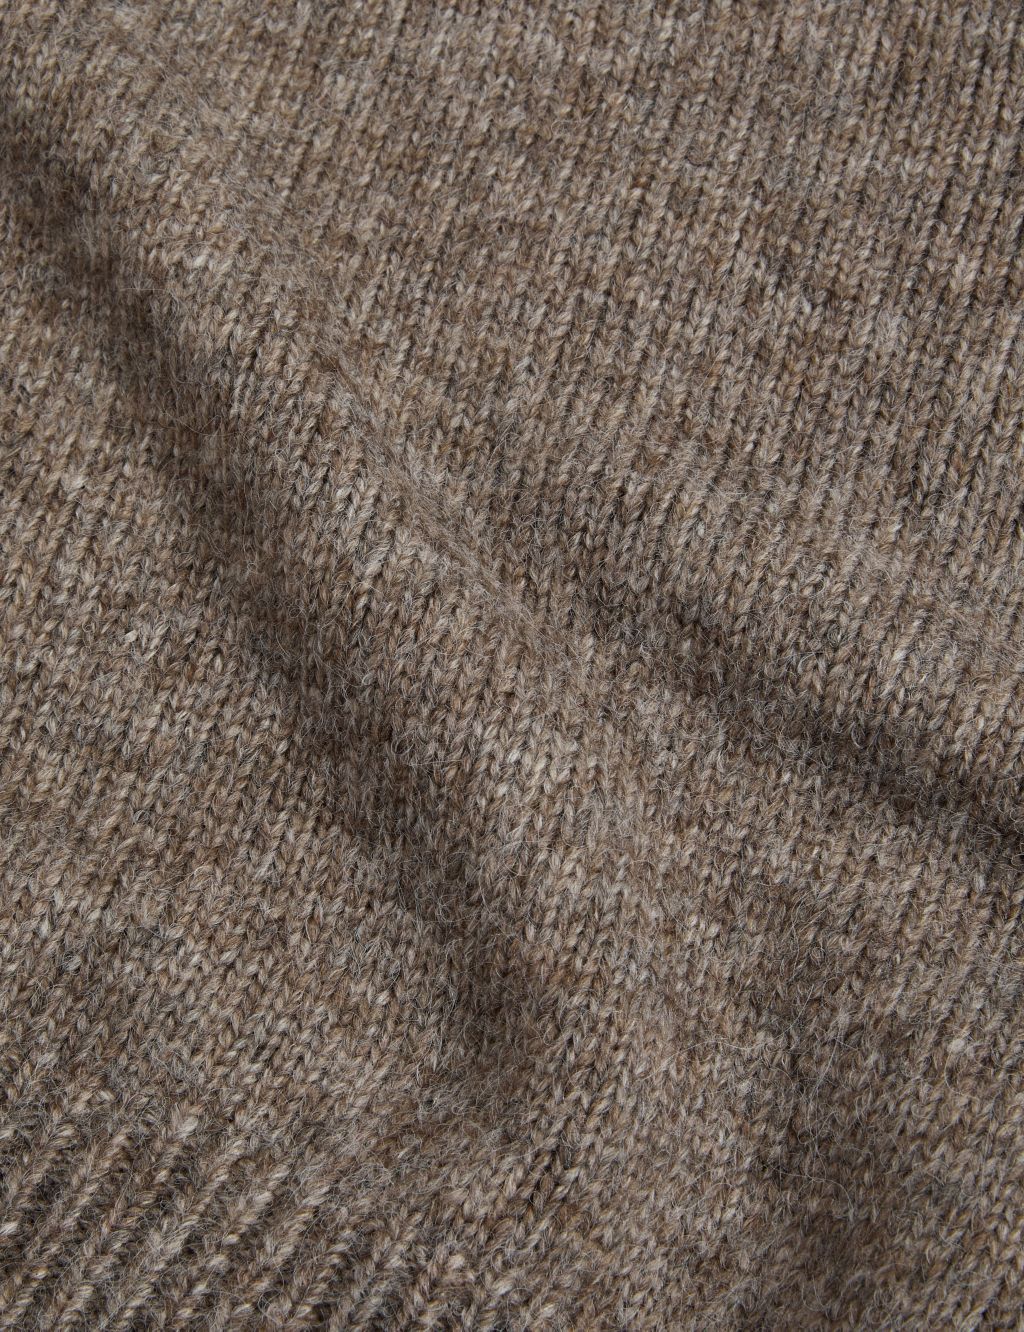 Crew Neck Jumper with Wool image 6